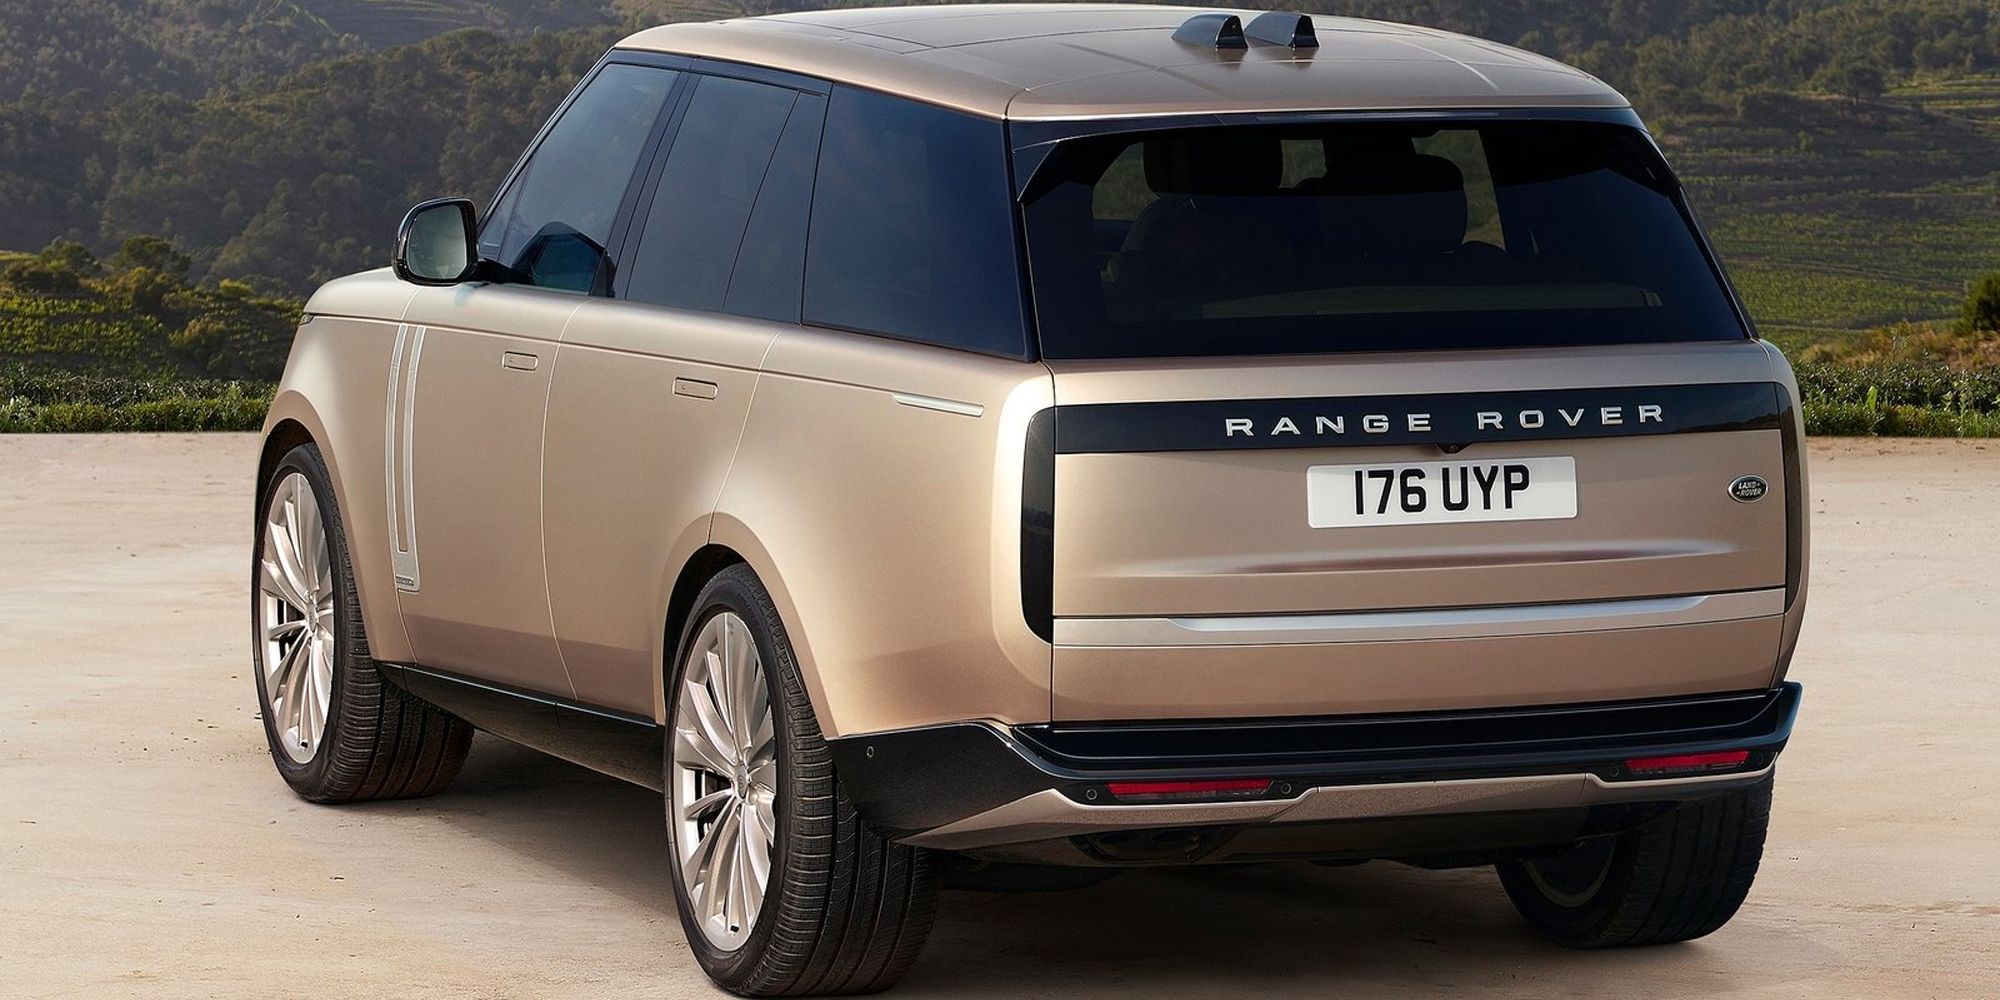 The rear of a gold Range Rover